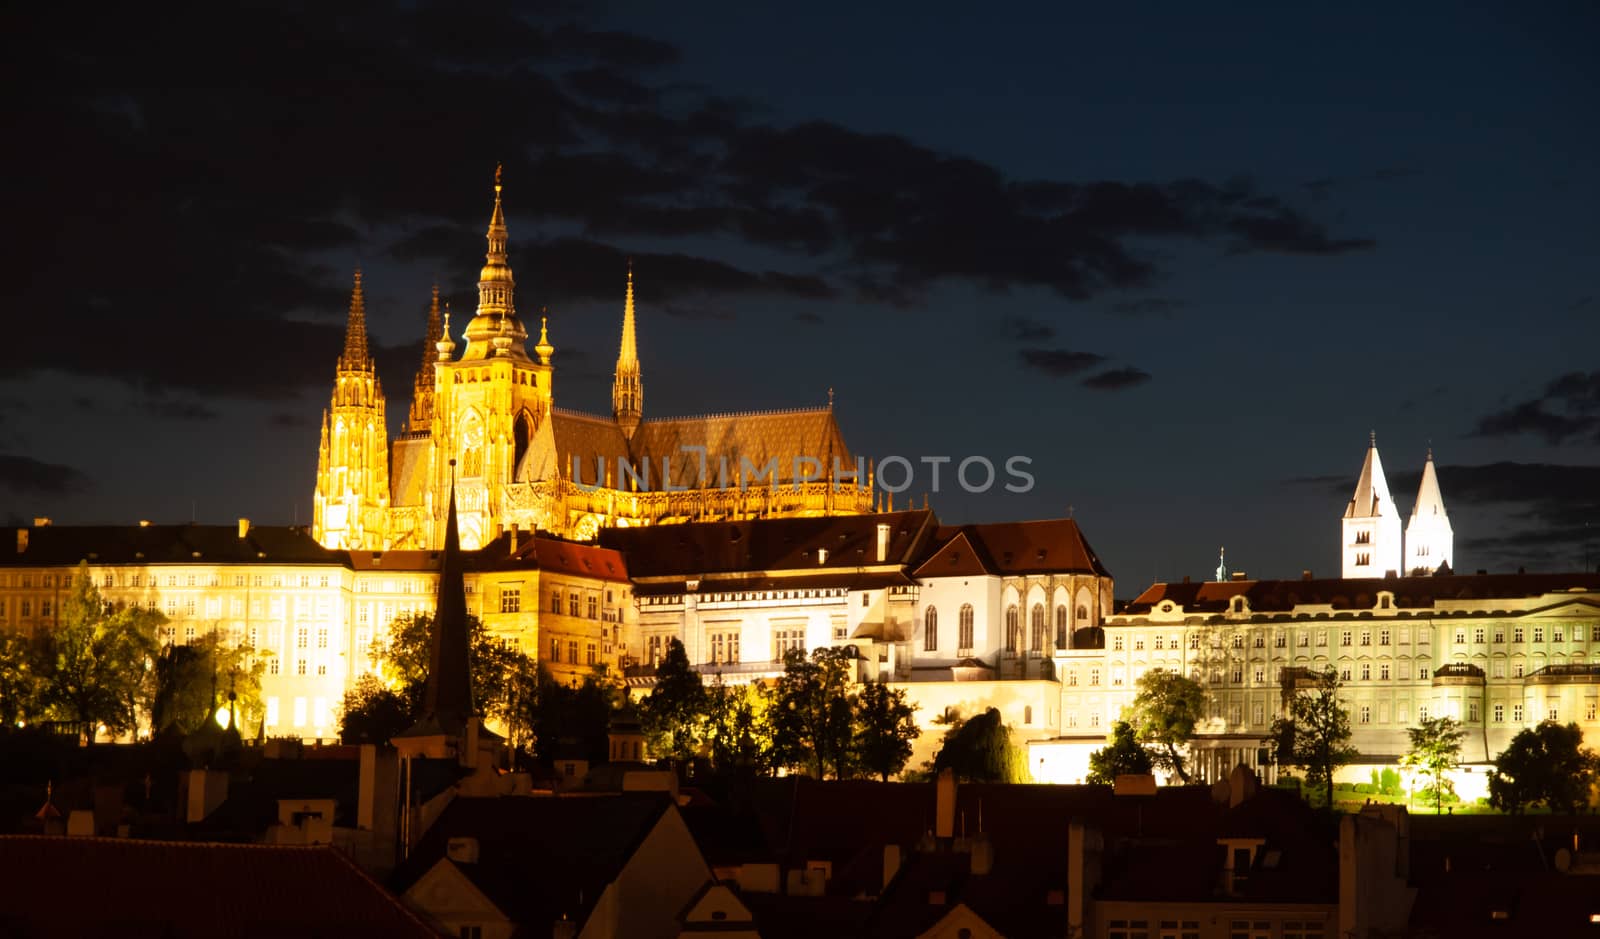 Hradcany with Prague Castle and St Vitus Cathedral by night. Prague, Czech Republic by pyty